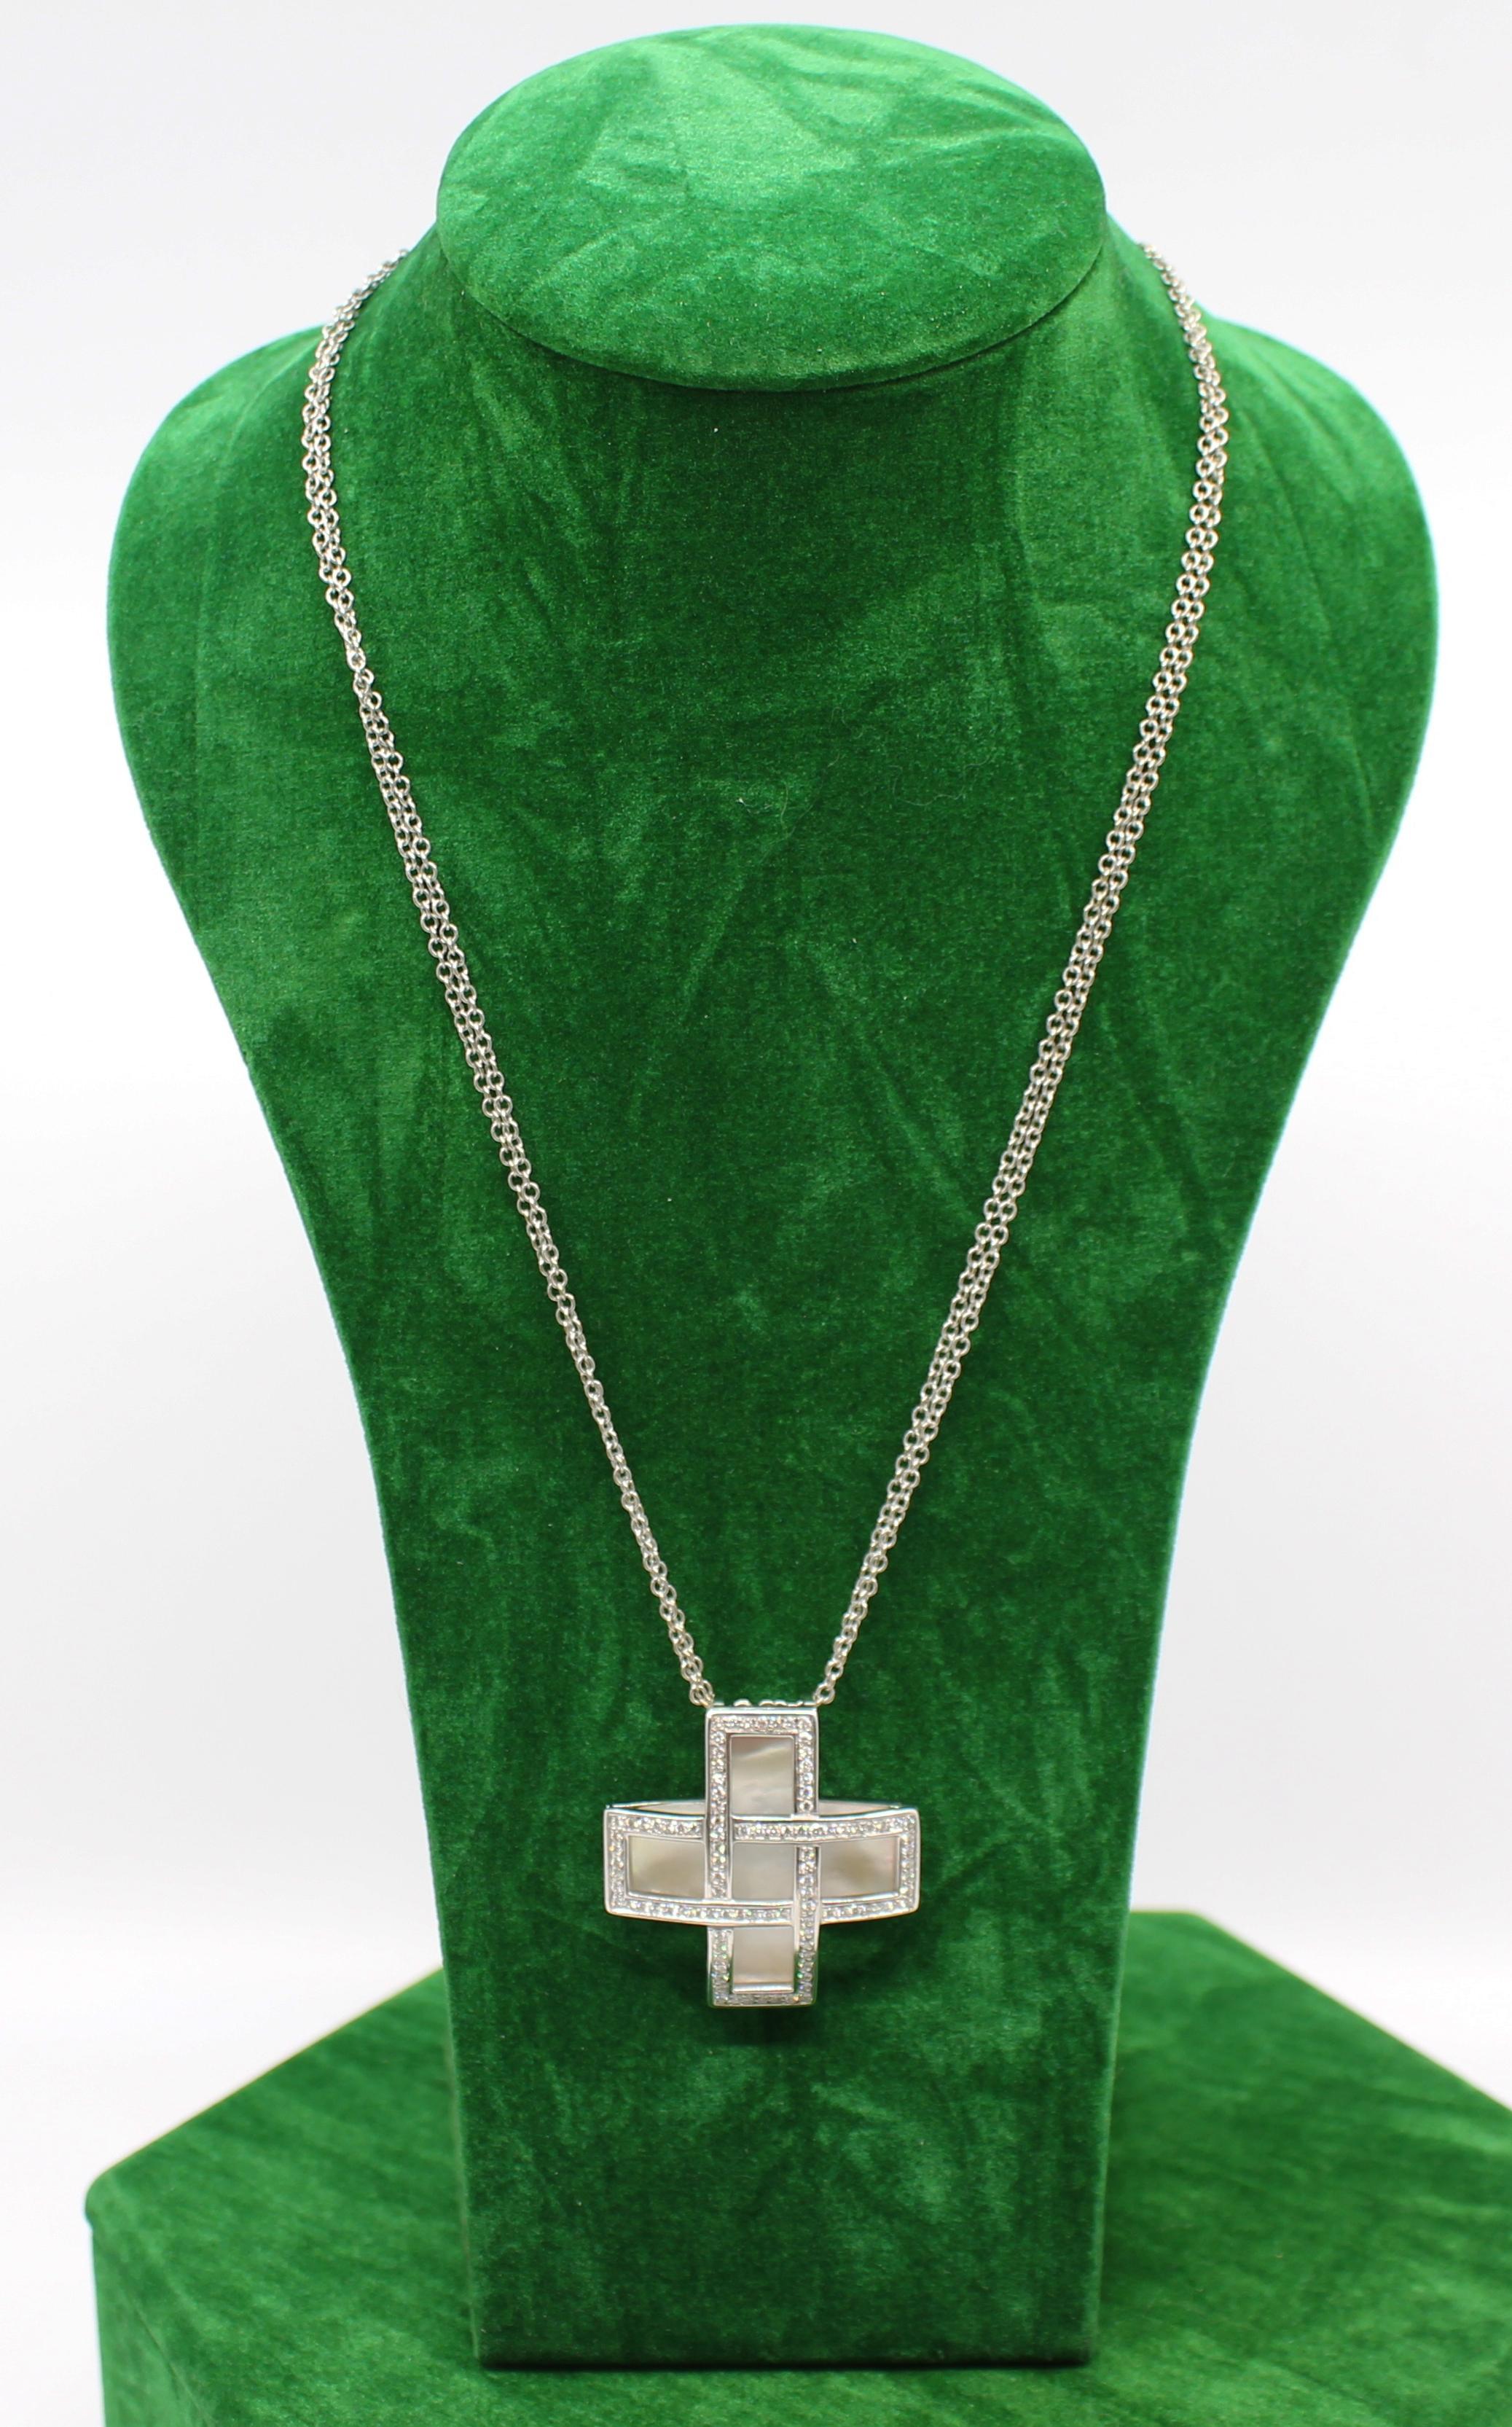 Boodles 18ct gold diamond & mother of pearl cross on chain


Period Late 20th c.

Composition 18ct white gold cross set with mother of pearl and diamonds

Dimensions (cross) 3.5 x 3.5 x 1 cm

Total weight 27.4 g

Condition Very good